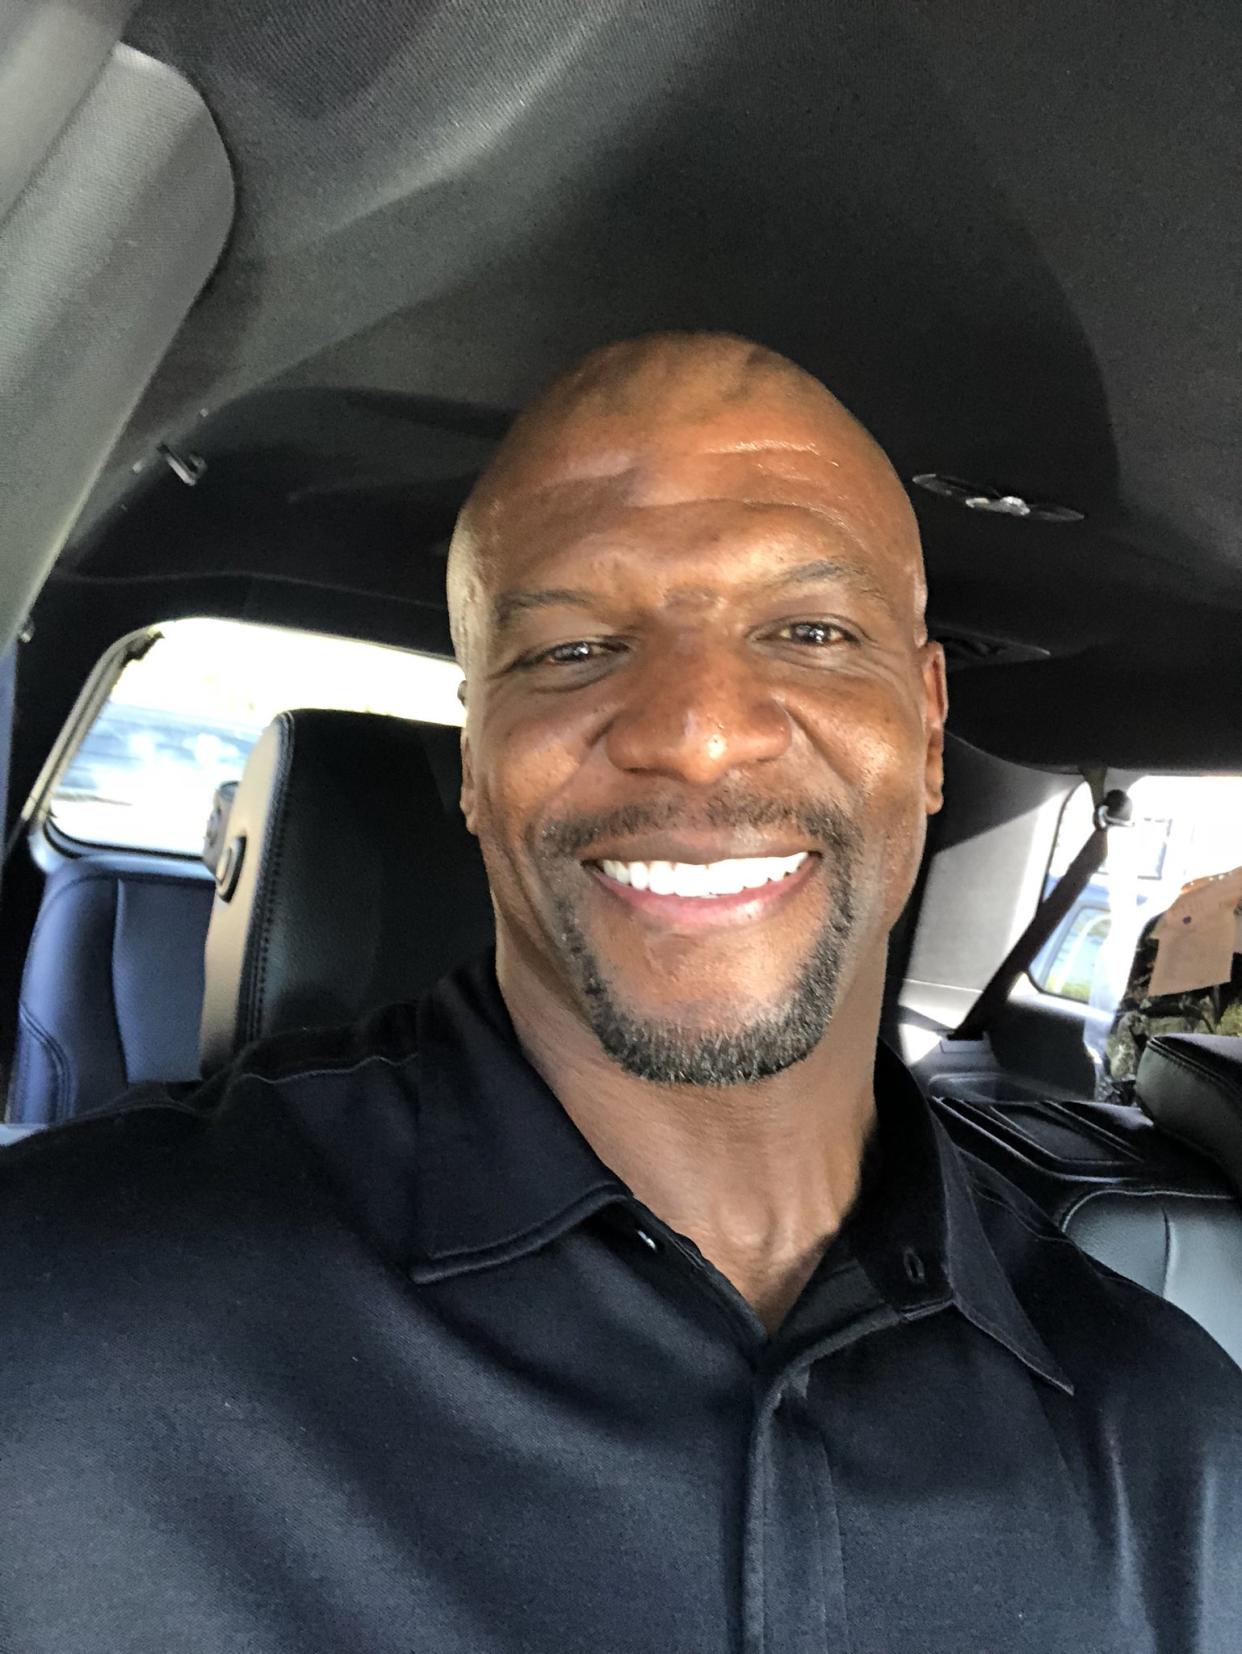 Terry Crews helped lift up the #BlackMenSmiling trend on social media (Photo: Twitter/@terrycrews)